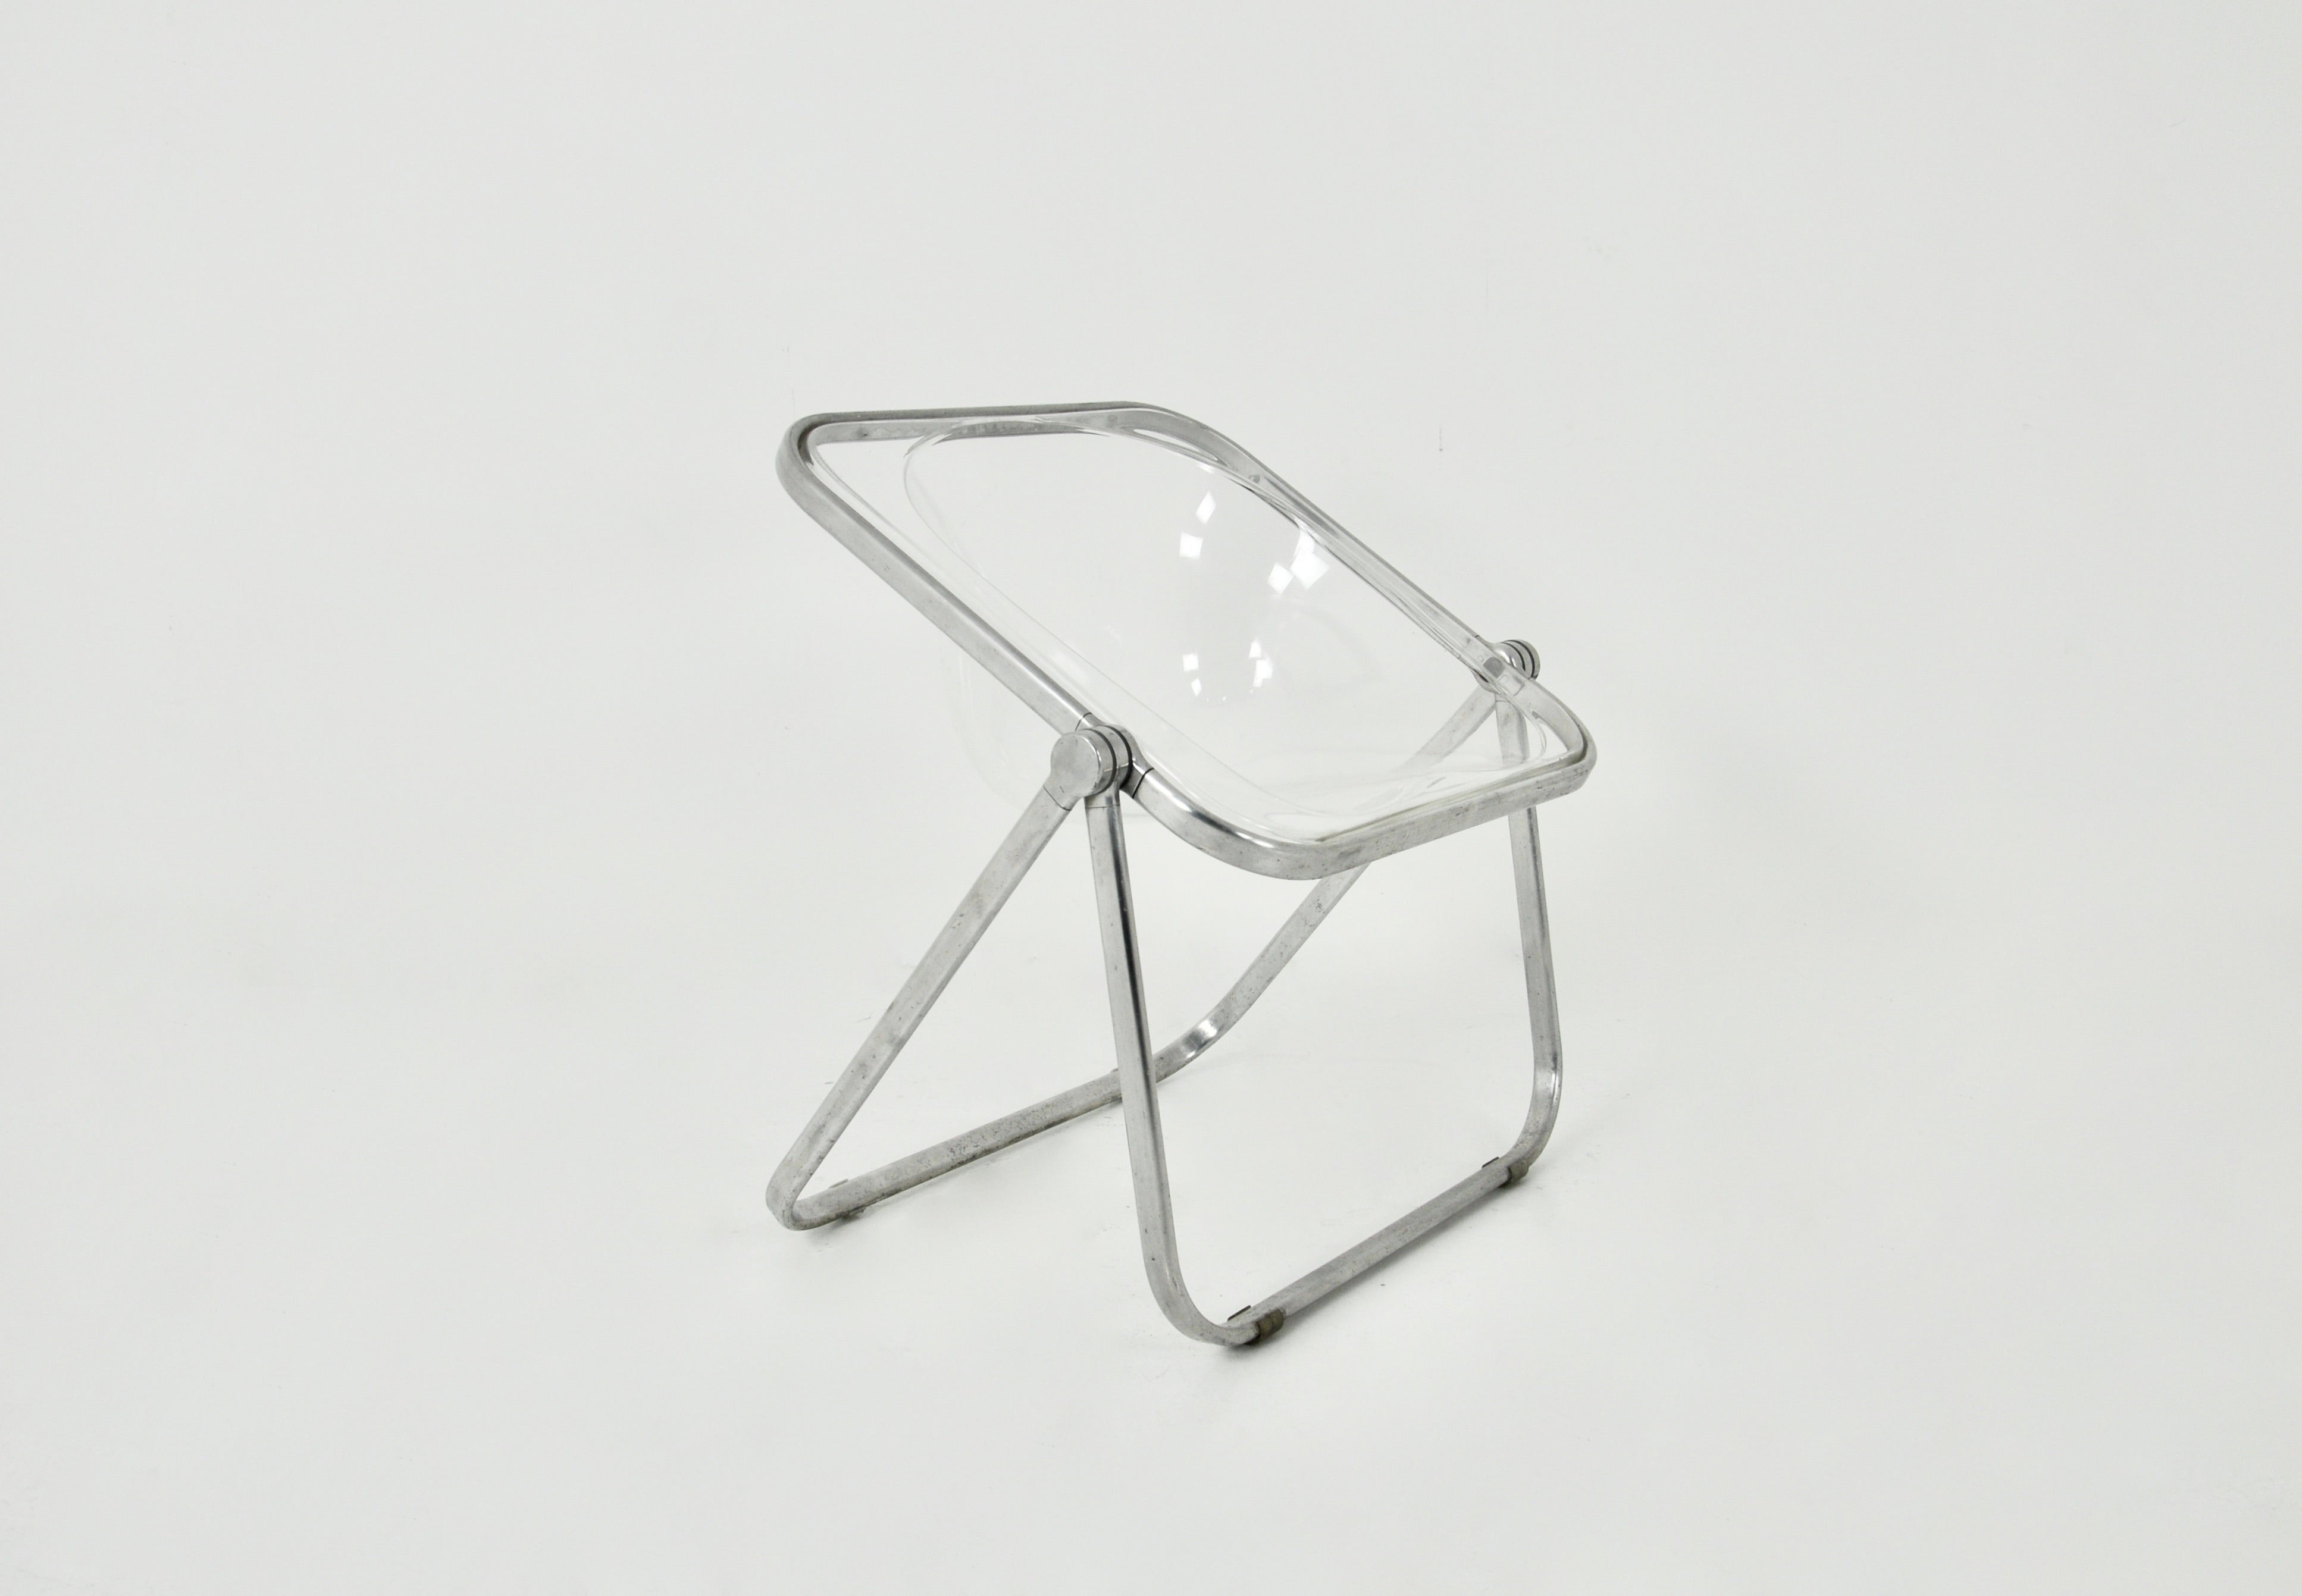 Plastic and metal folding armchair. Stamped. Dimensions: seat height: 43cm. Wear due to time and age.